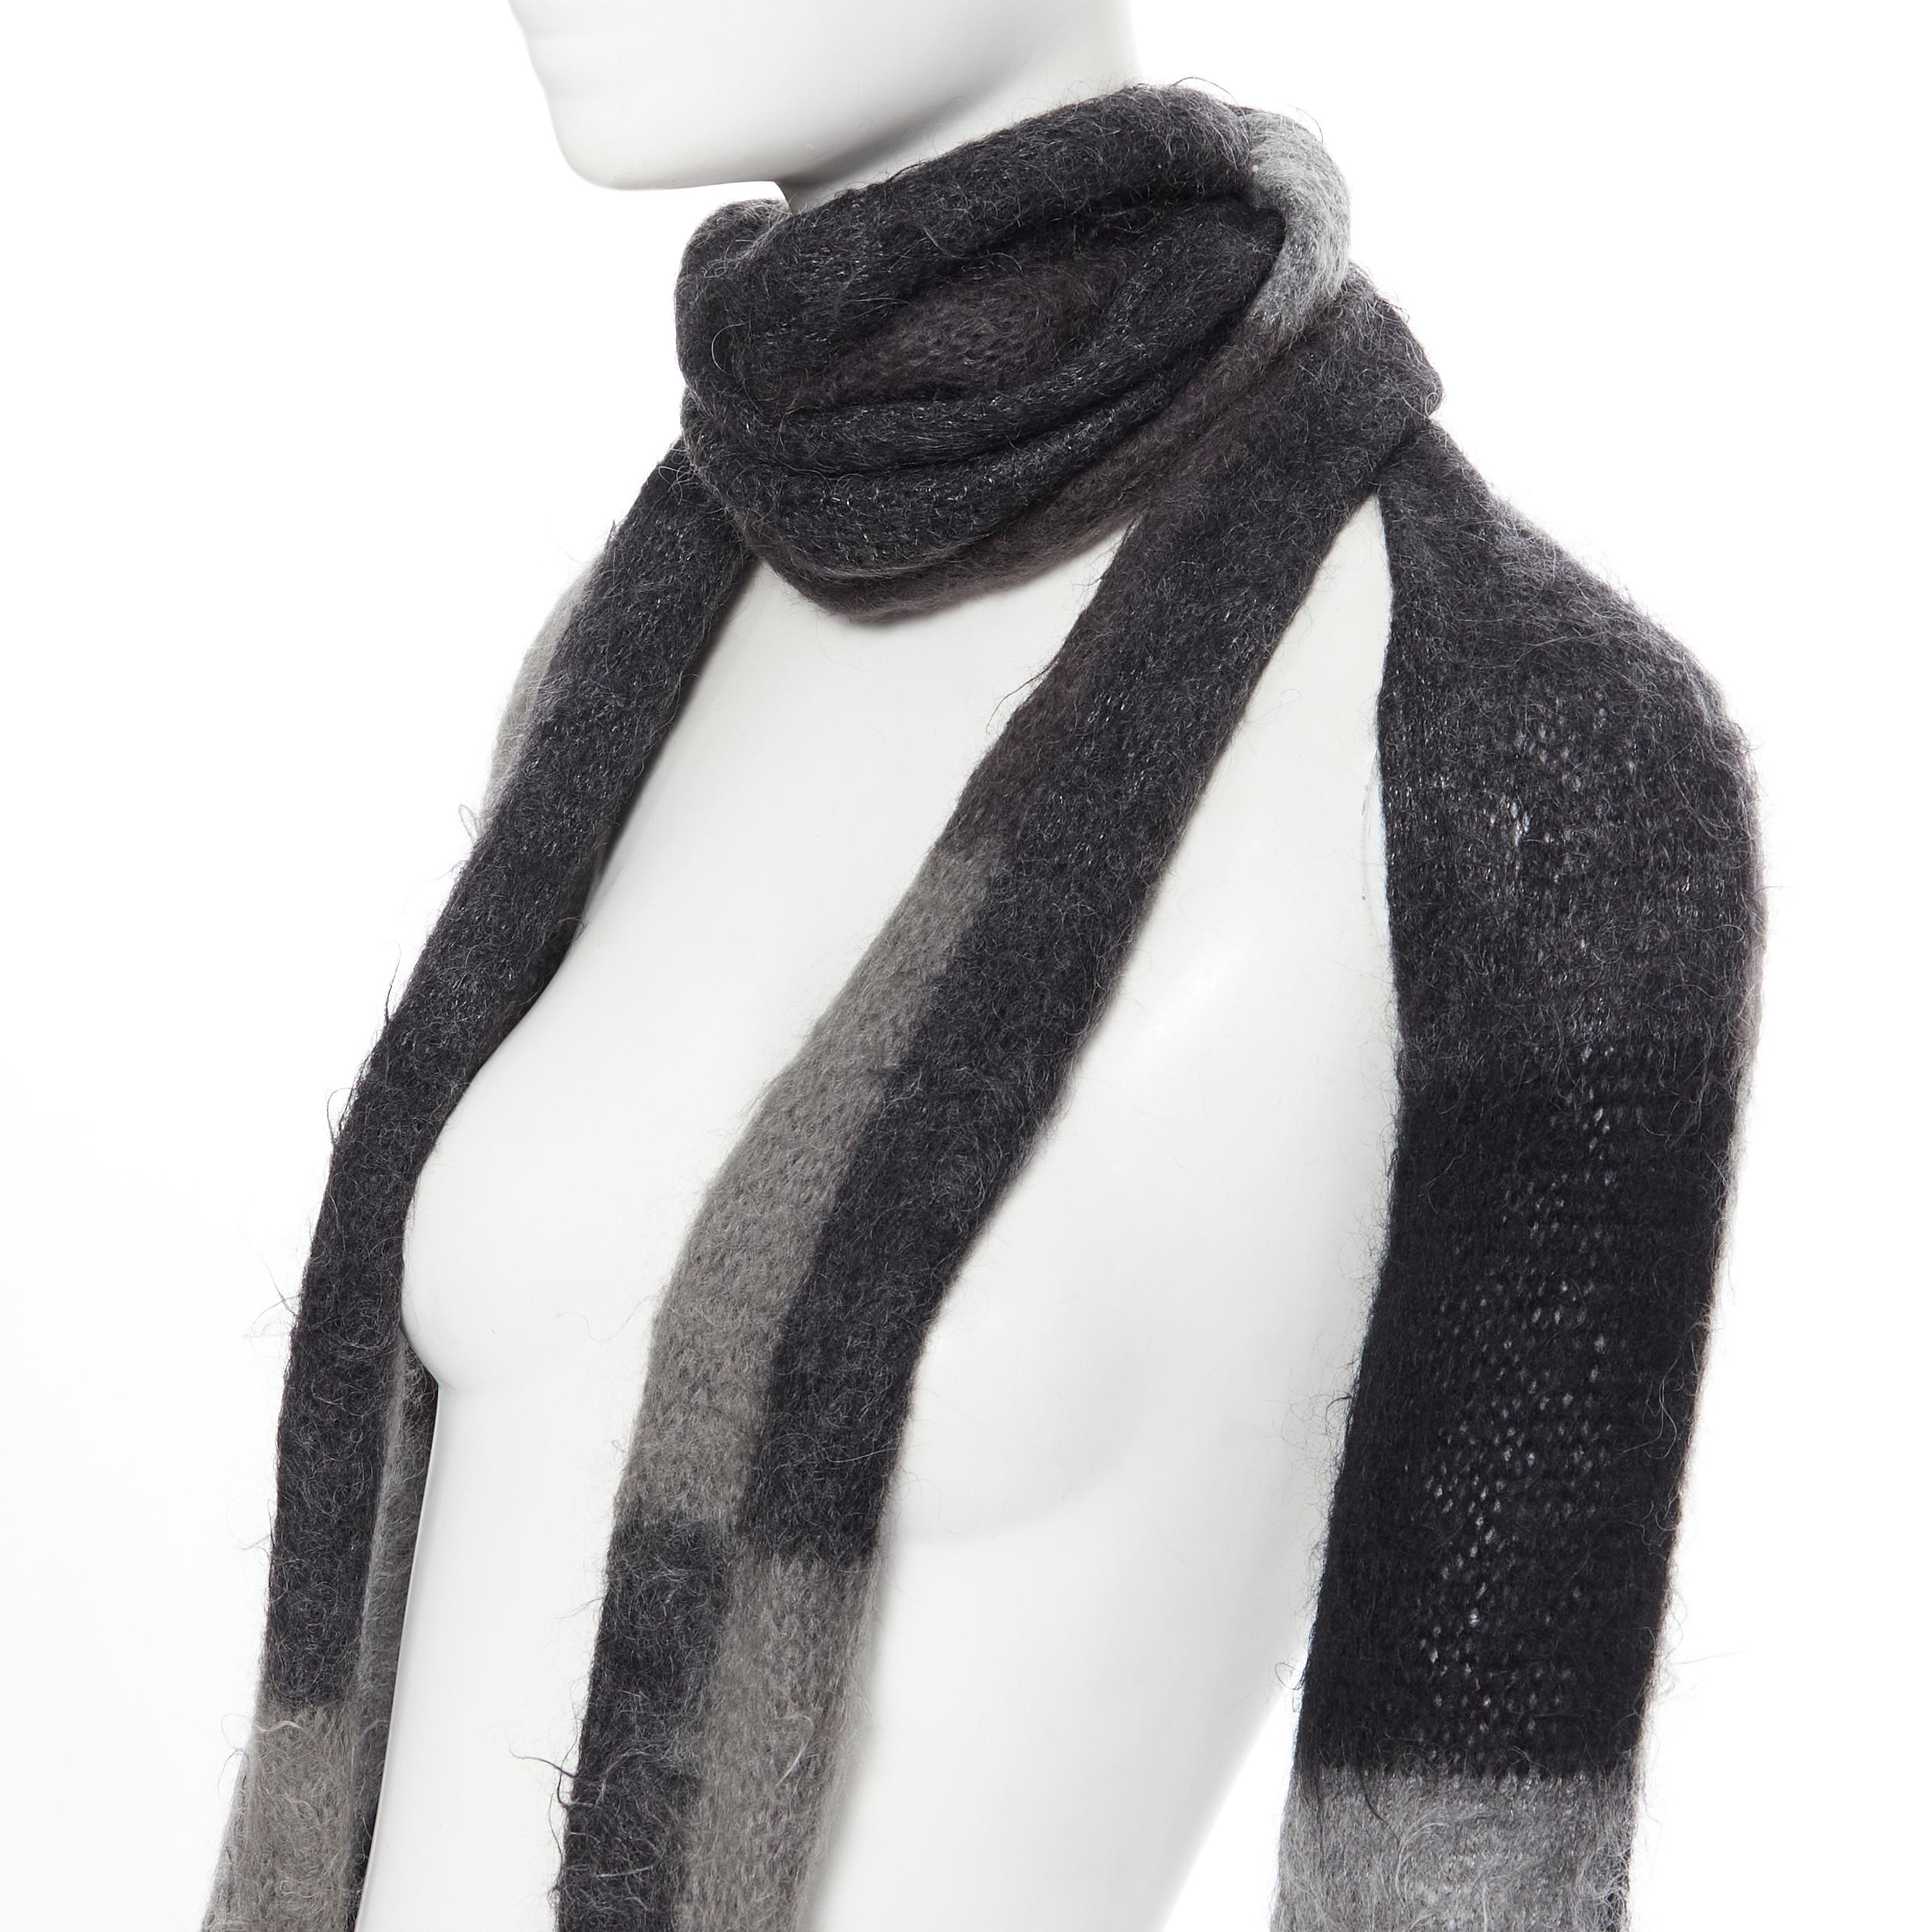 Women's UNDERCOVER grey black check wool knit fingerless glove extra long scarf